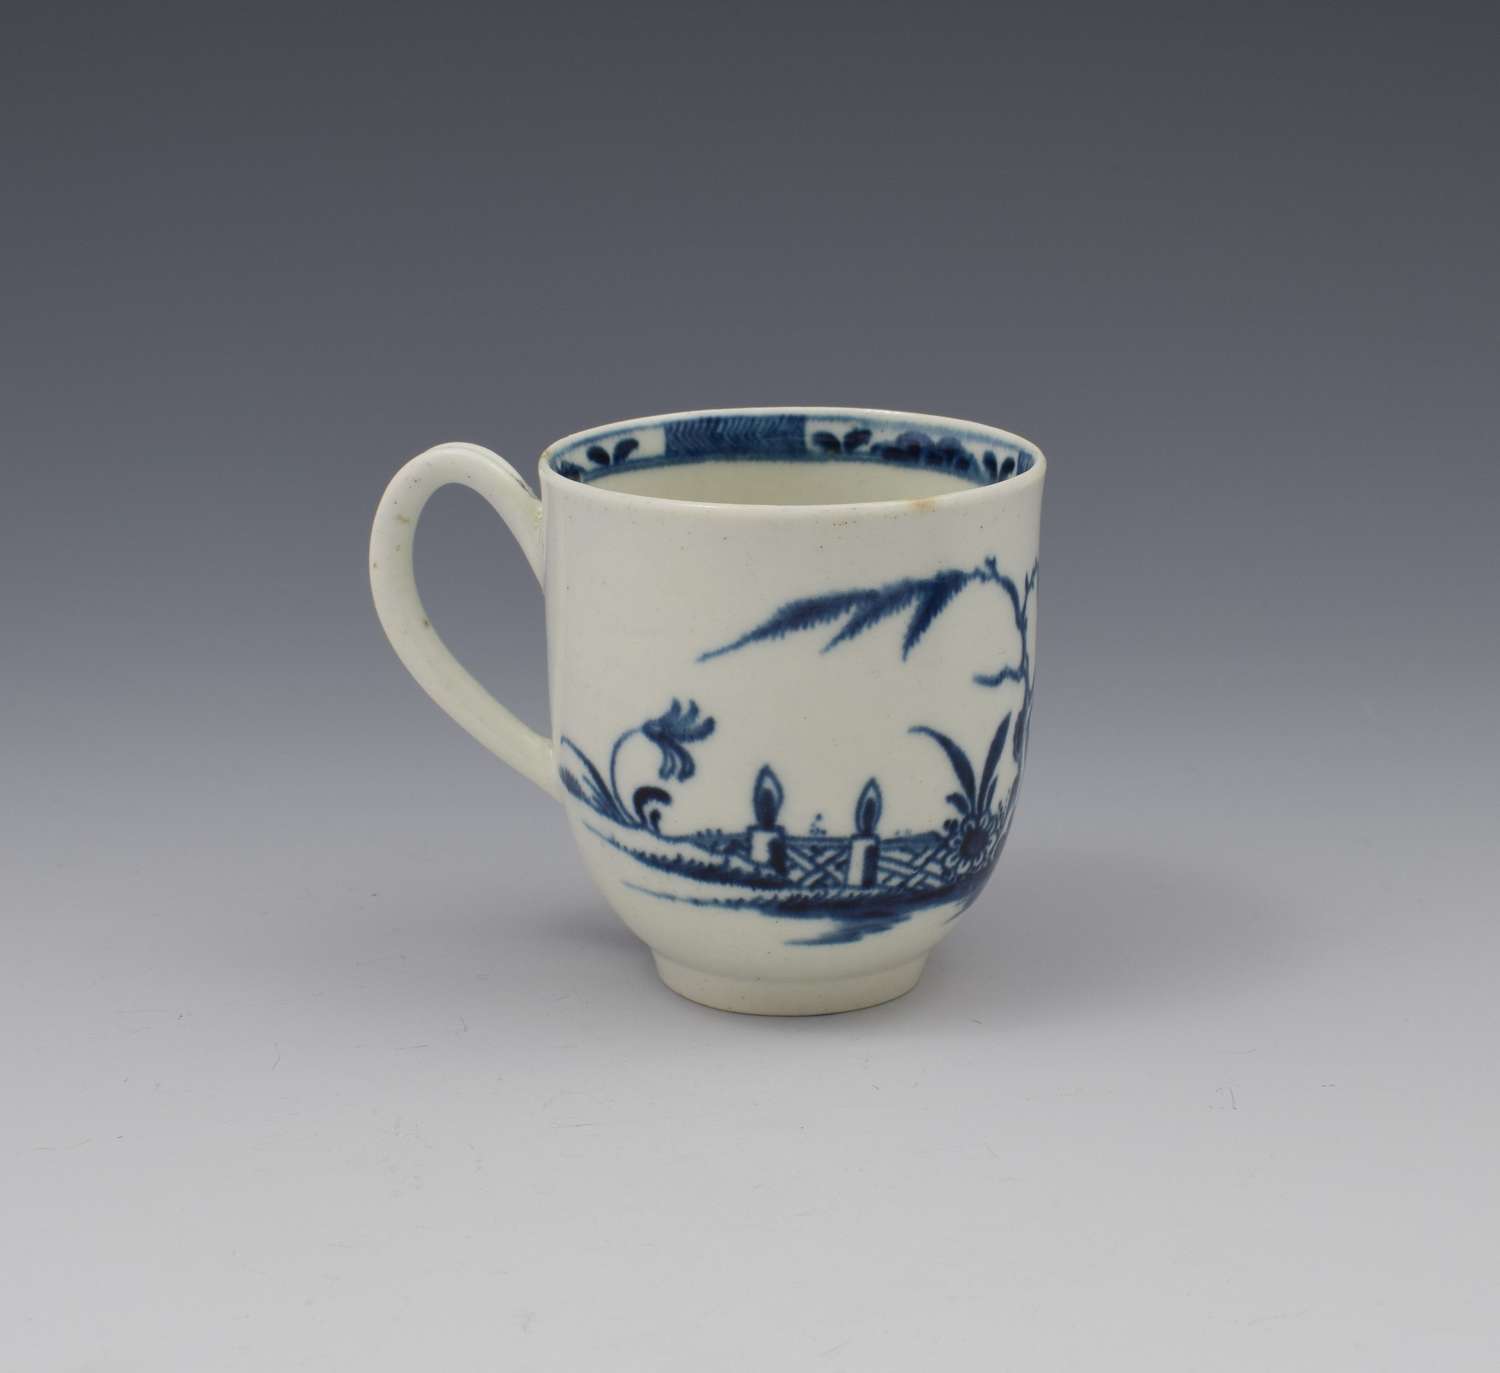 First Period Worcester Porcelain Candle Fence Coffee Cup c.1770